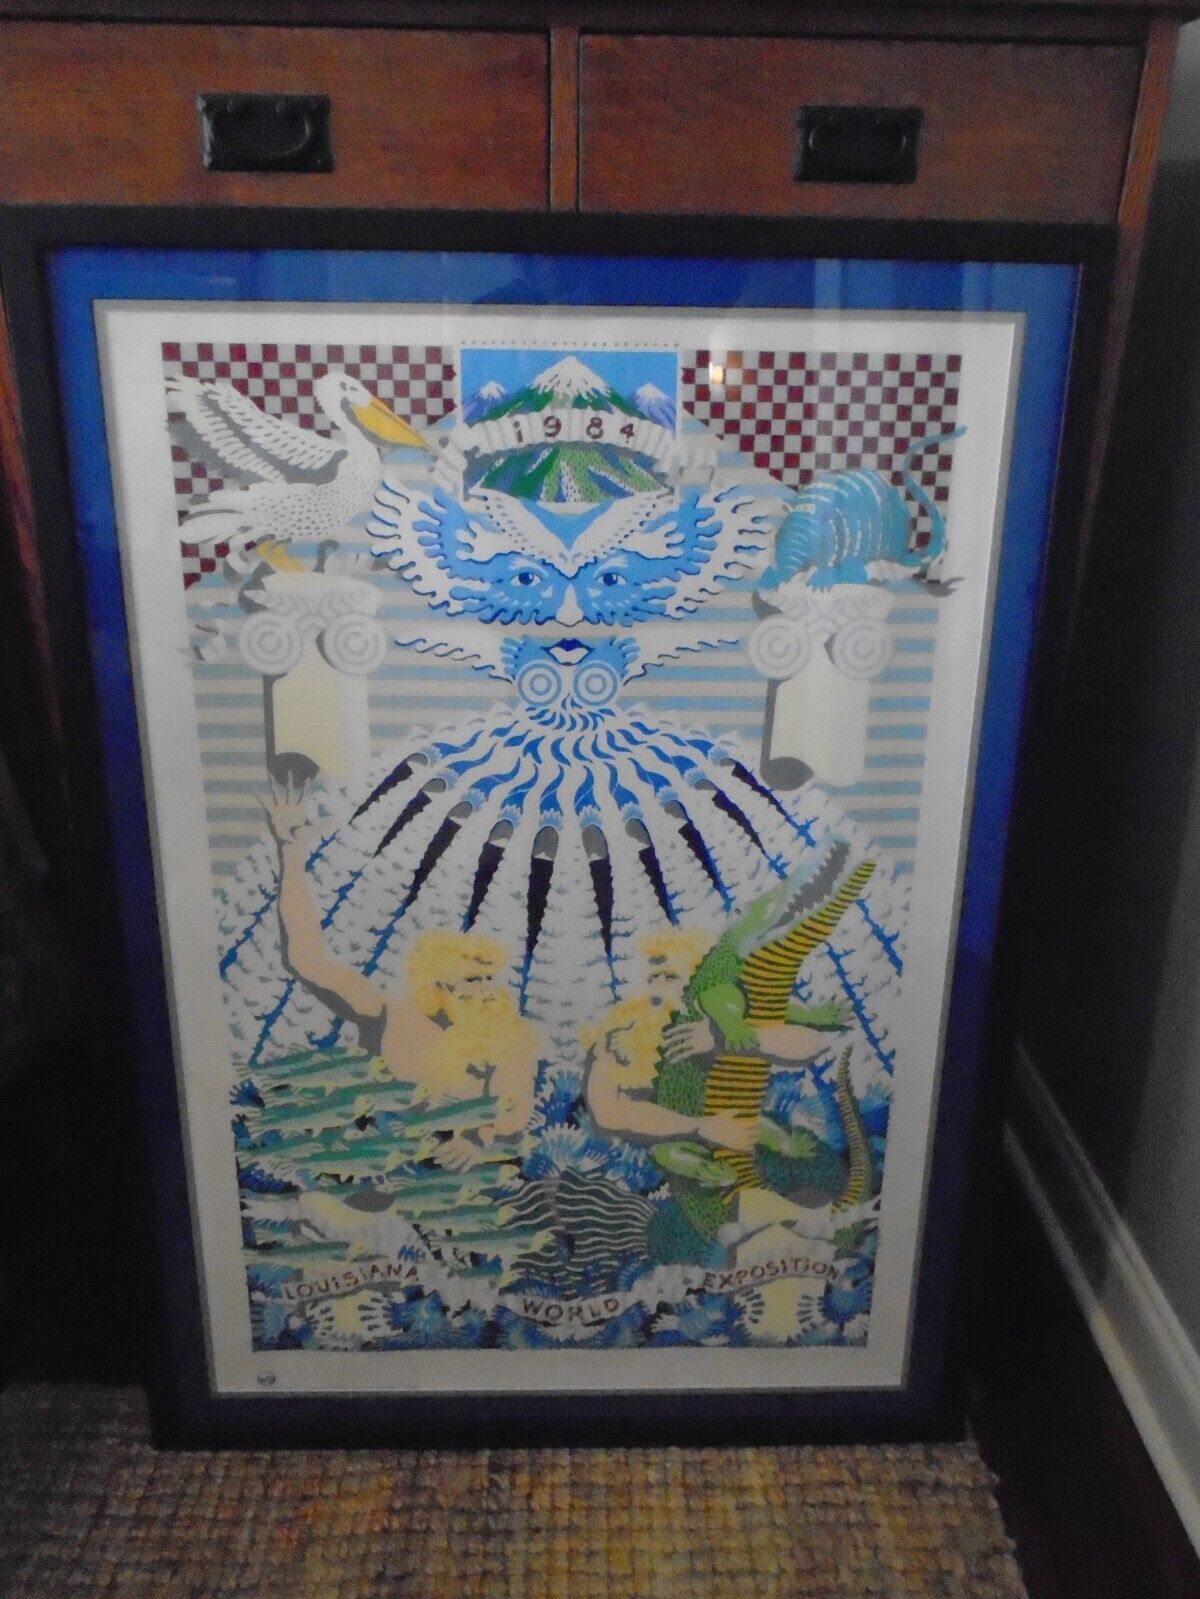 Rare 1984 Louisiana World Exposition Lithograph, Signed/# poster New Orleans